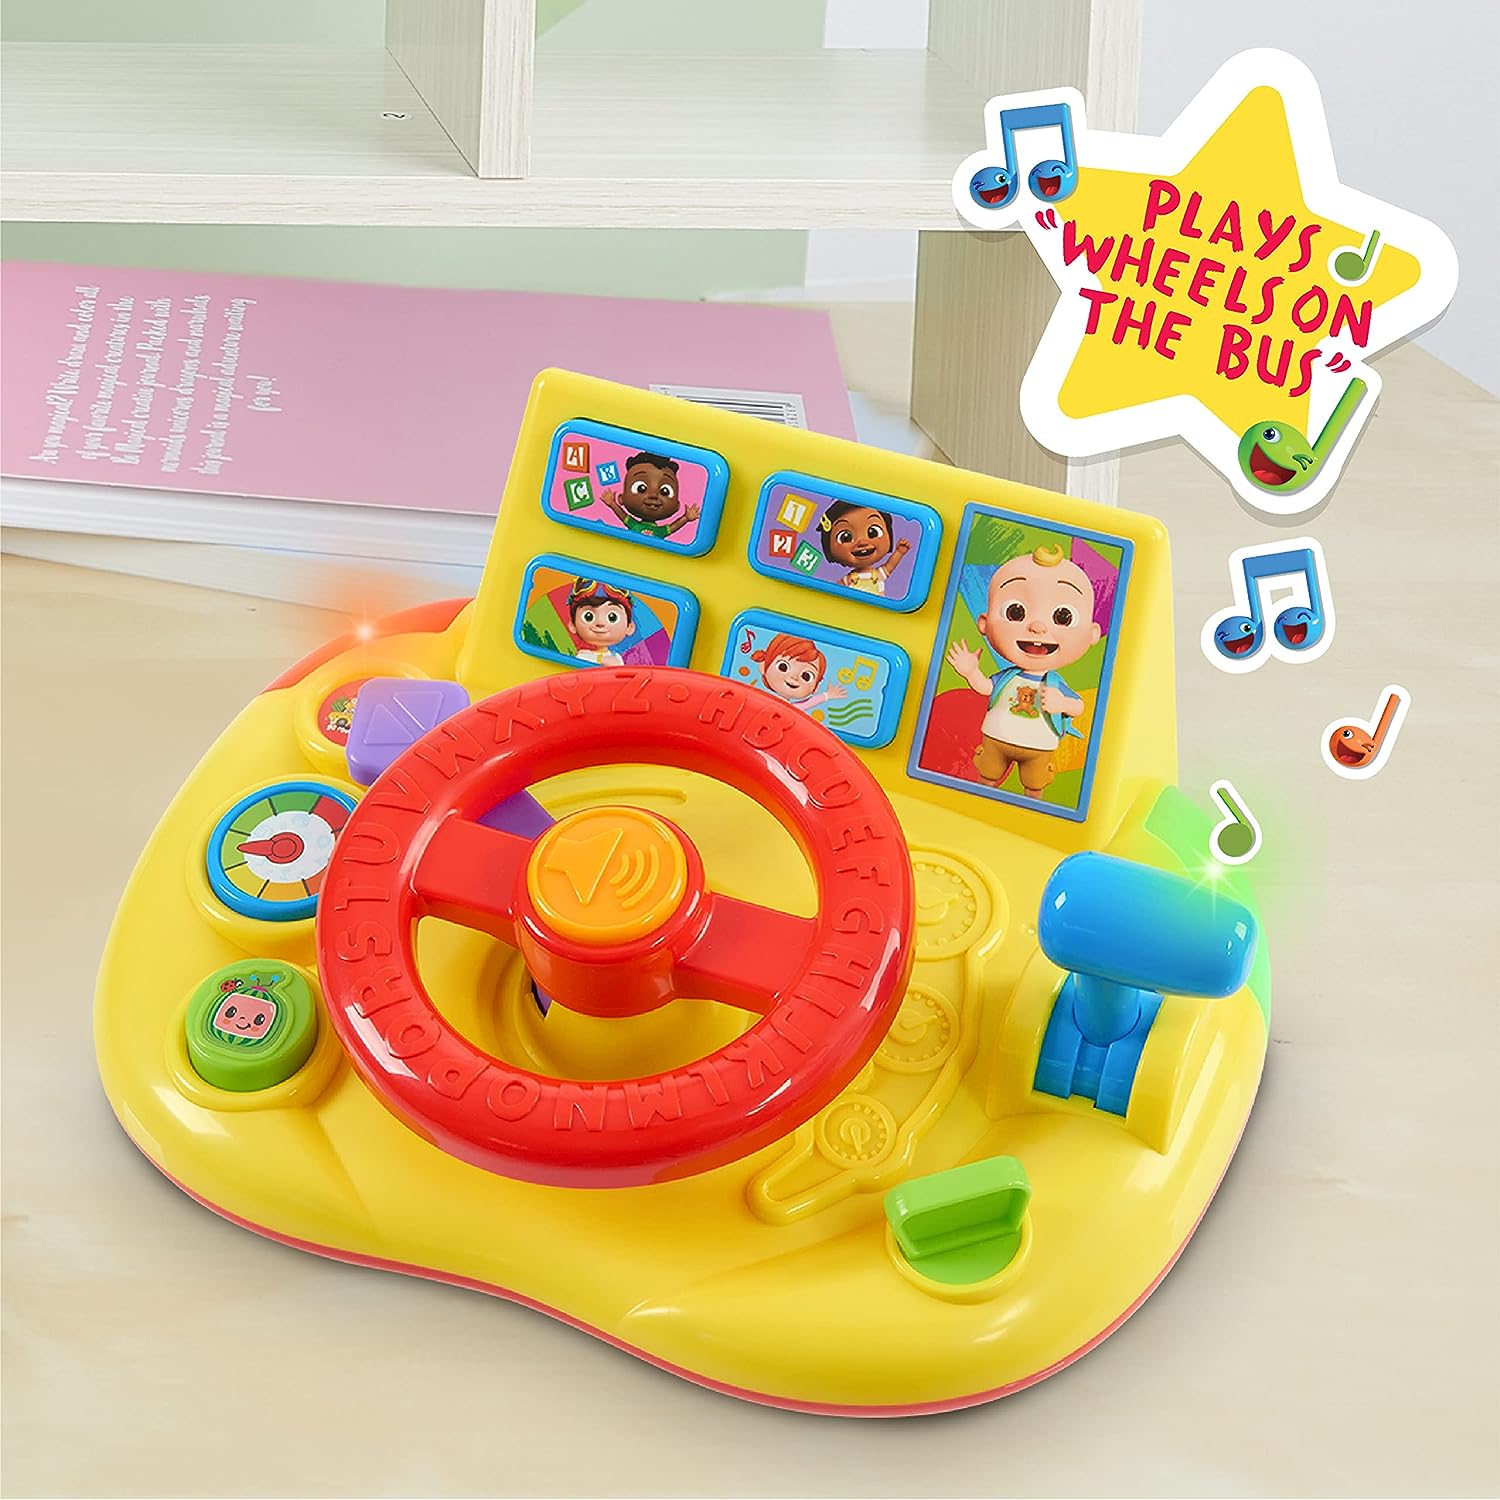 CoComelon Learning Steering Wheel, Learning & Education, Officially Licensed Kids Toys for Ages 3 Up by Just Play